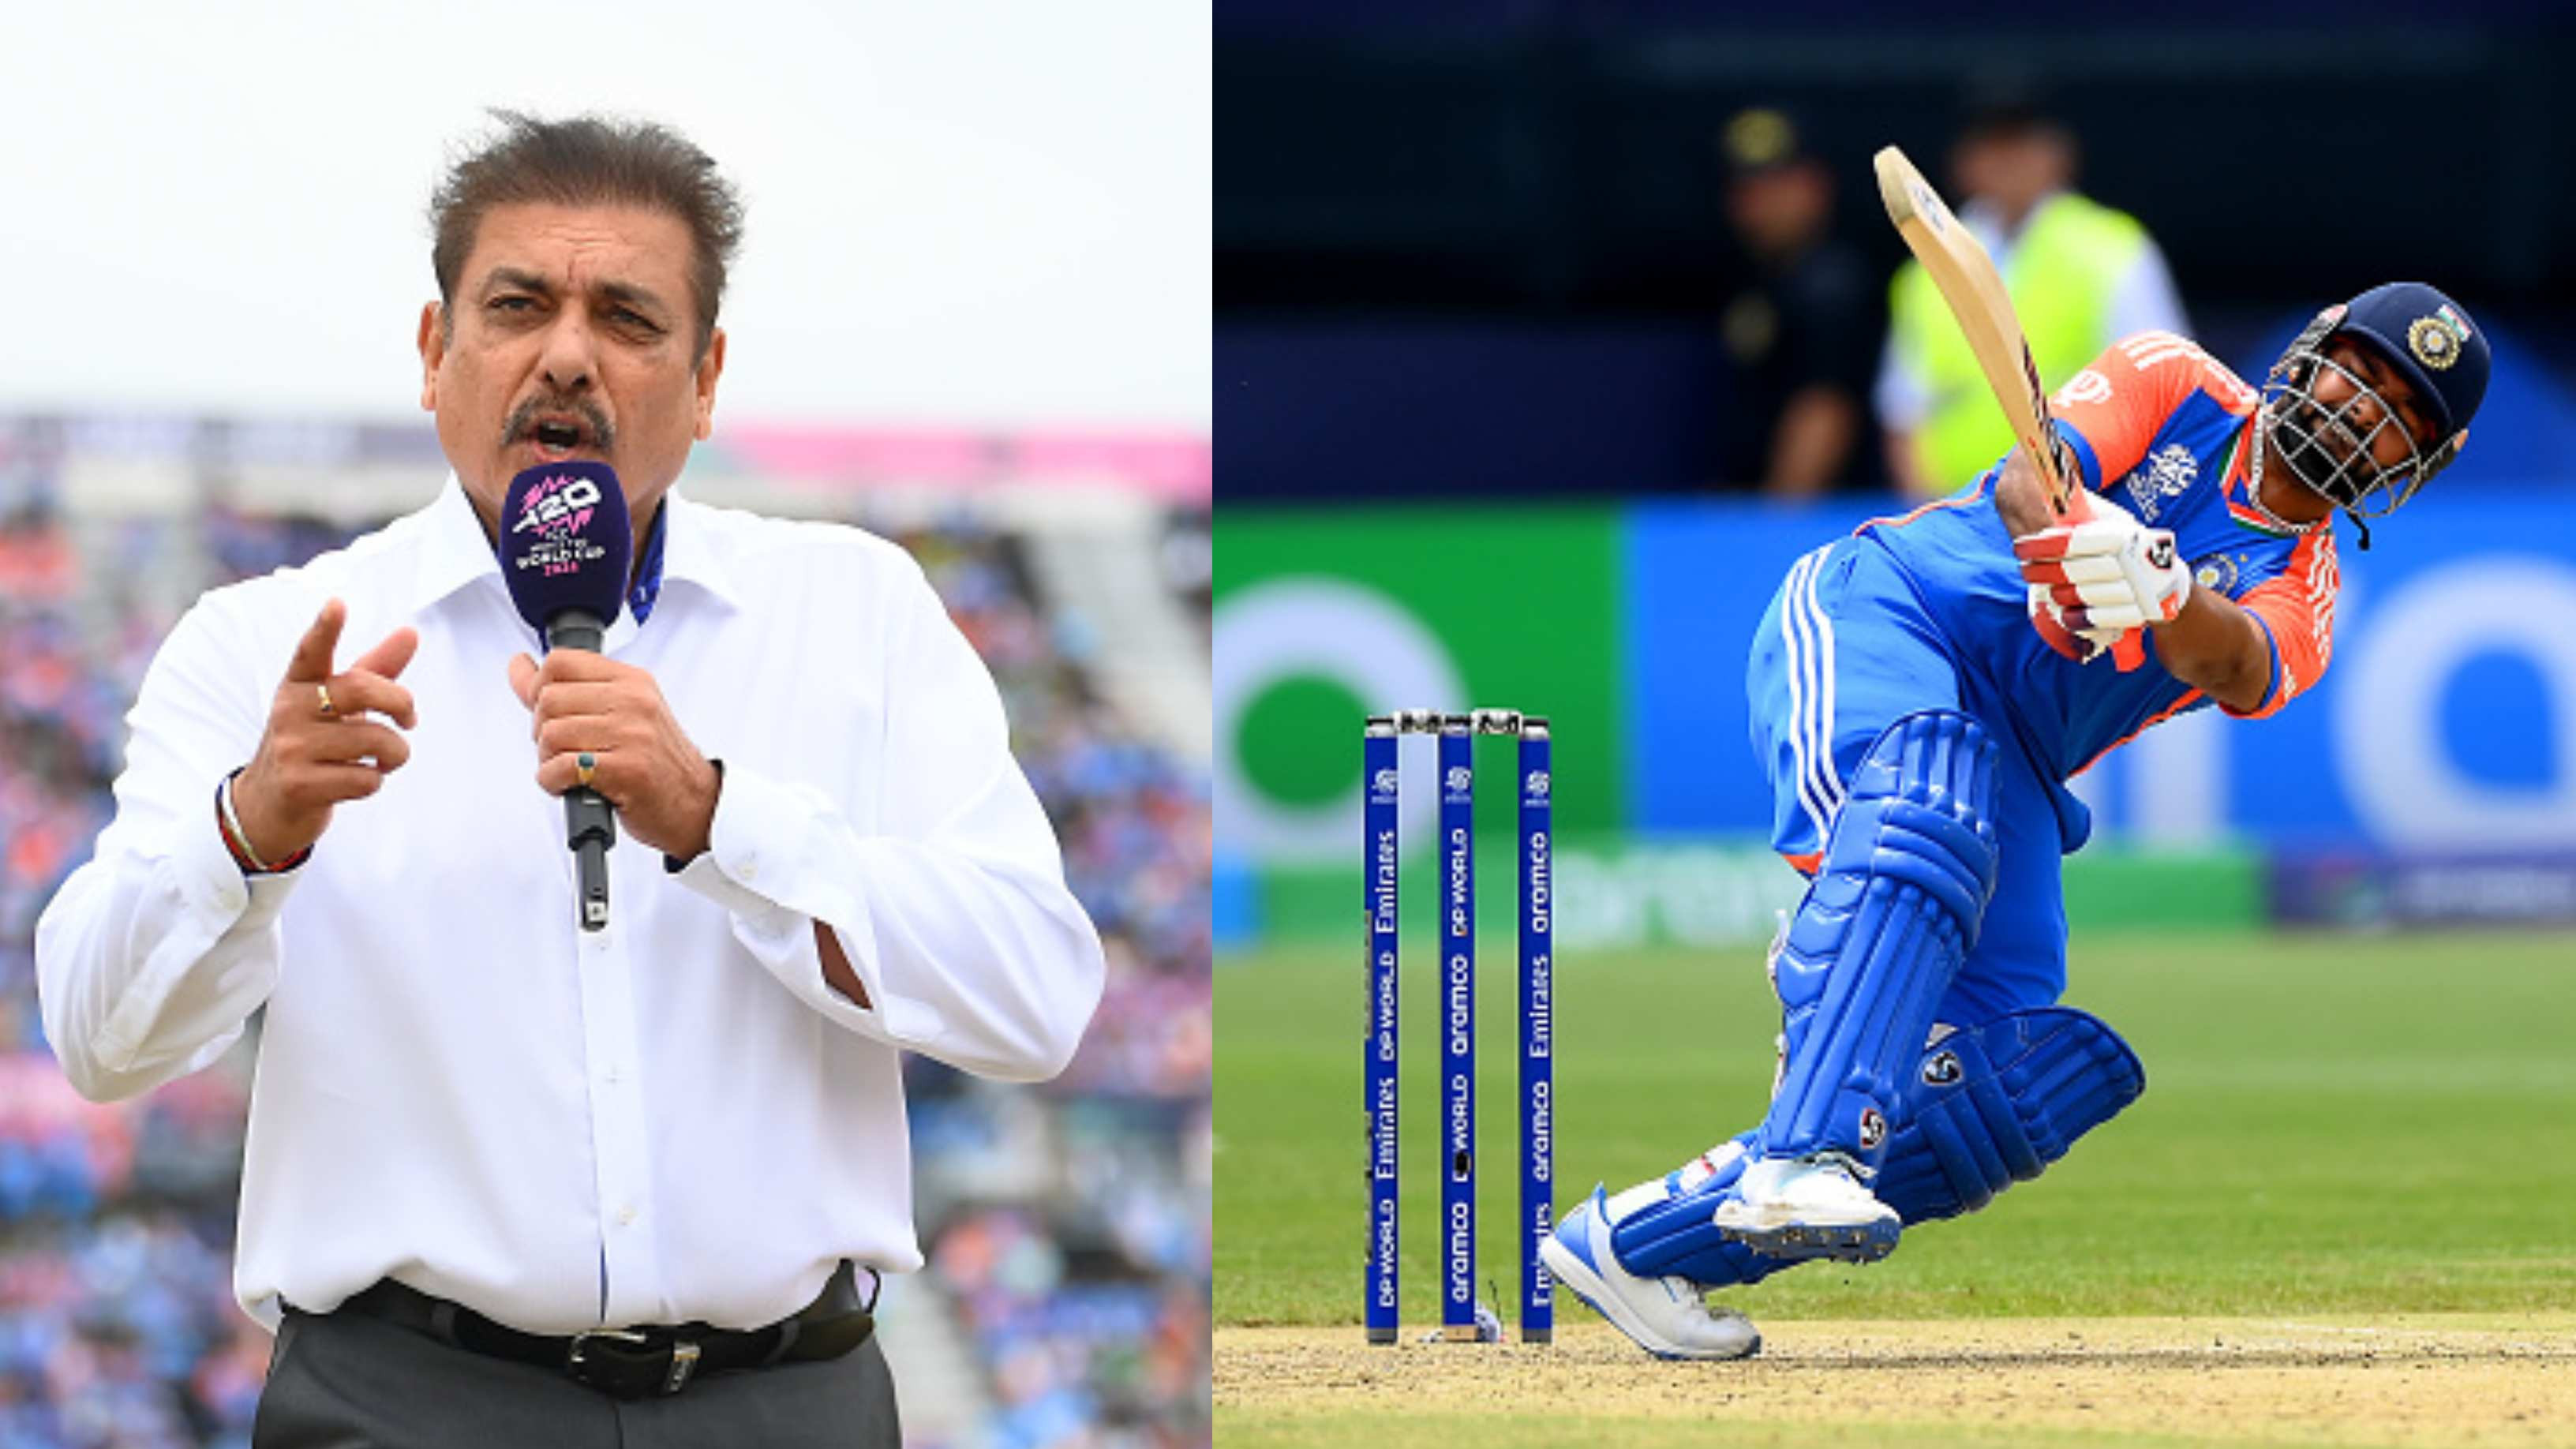 He was carrying his own chef during IPL 2024: Shastri opens up on Rishabh Pant’s dedication to make strong return to cricket